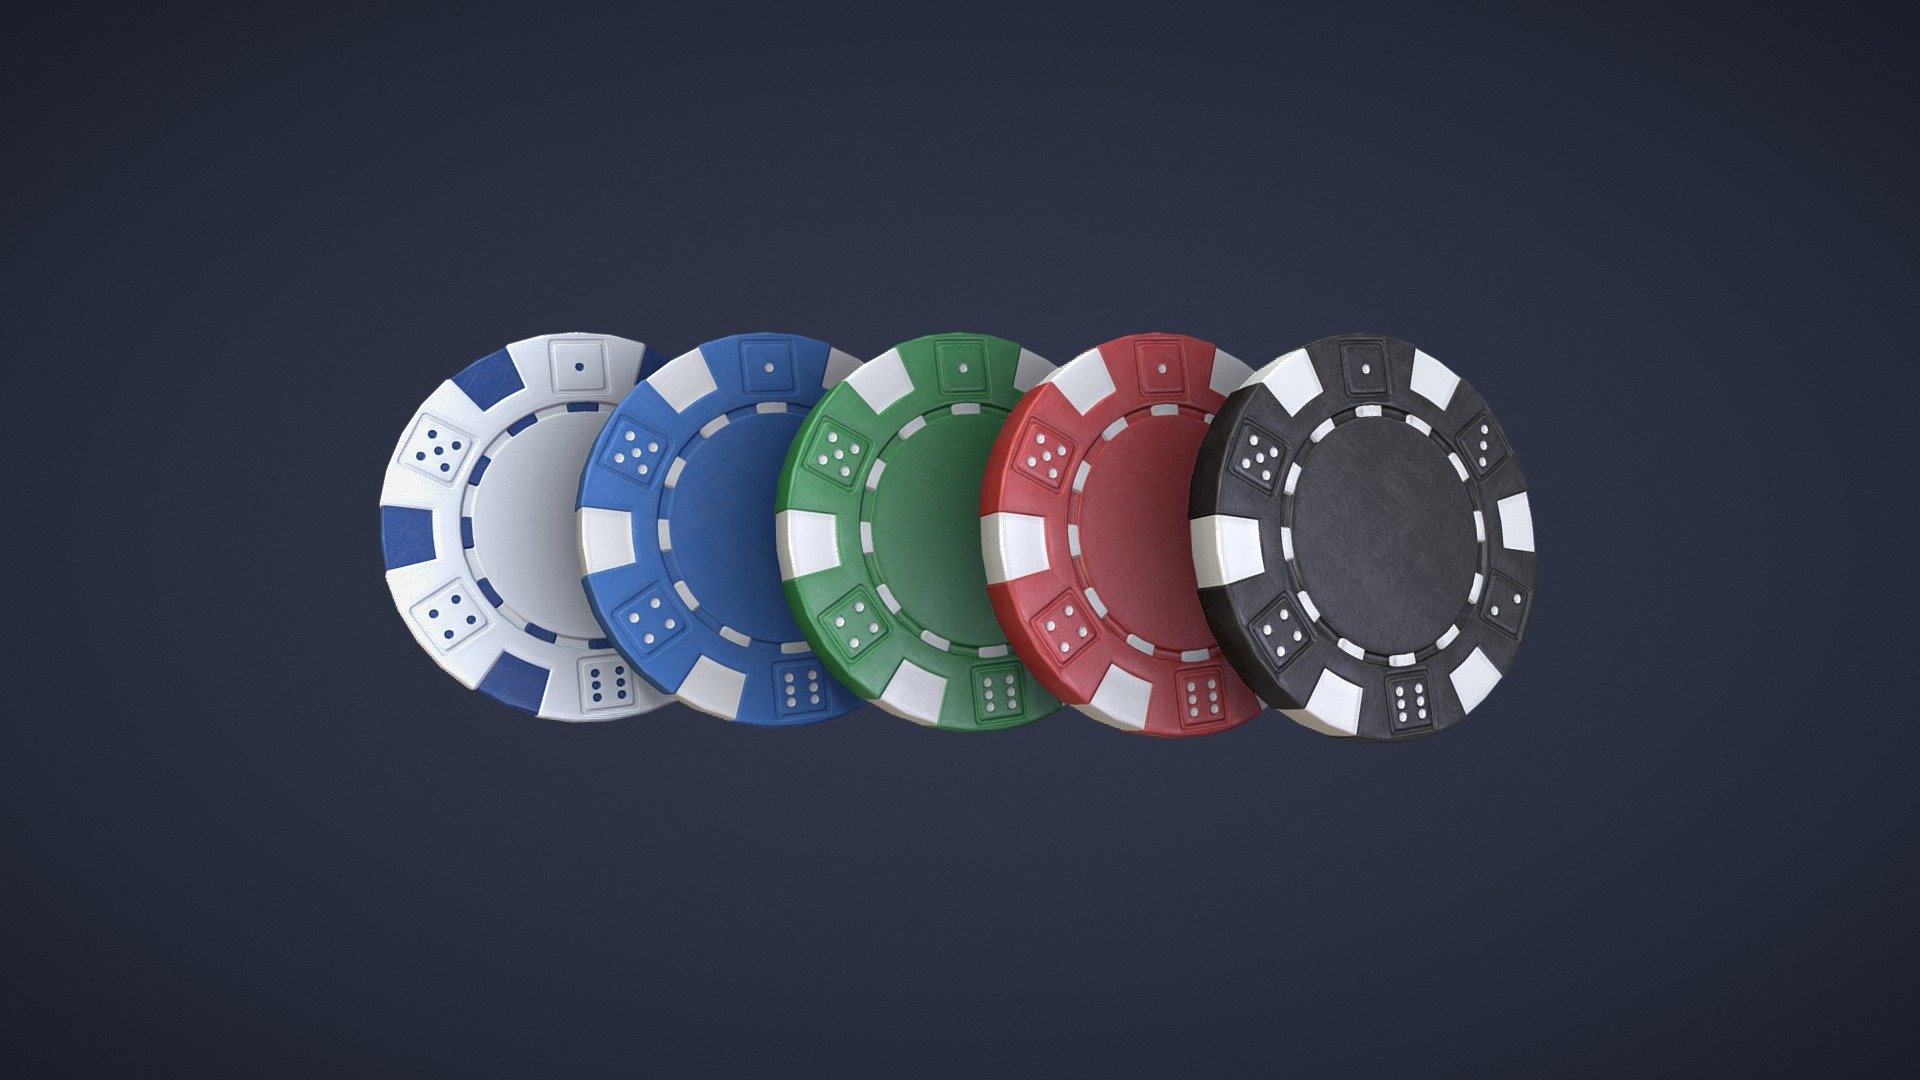 Set of poker chips

Pack include:

Poker chips in black, red, green, blue and white color




Low poly - 360 tris

Mid poly - 9 072 tris

High poly - 59 520 tris

Base color, normal, roughness and metallic texture

1024x1024 and 4096x4096 PNG textures

AR / VR / Mobile ready - Poker Chips - Buy Royalty Free 3D model by Andrii Sedykh (@andriisedykh) 3d model